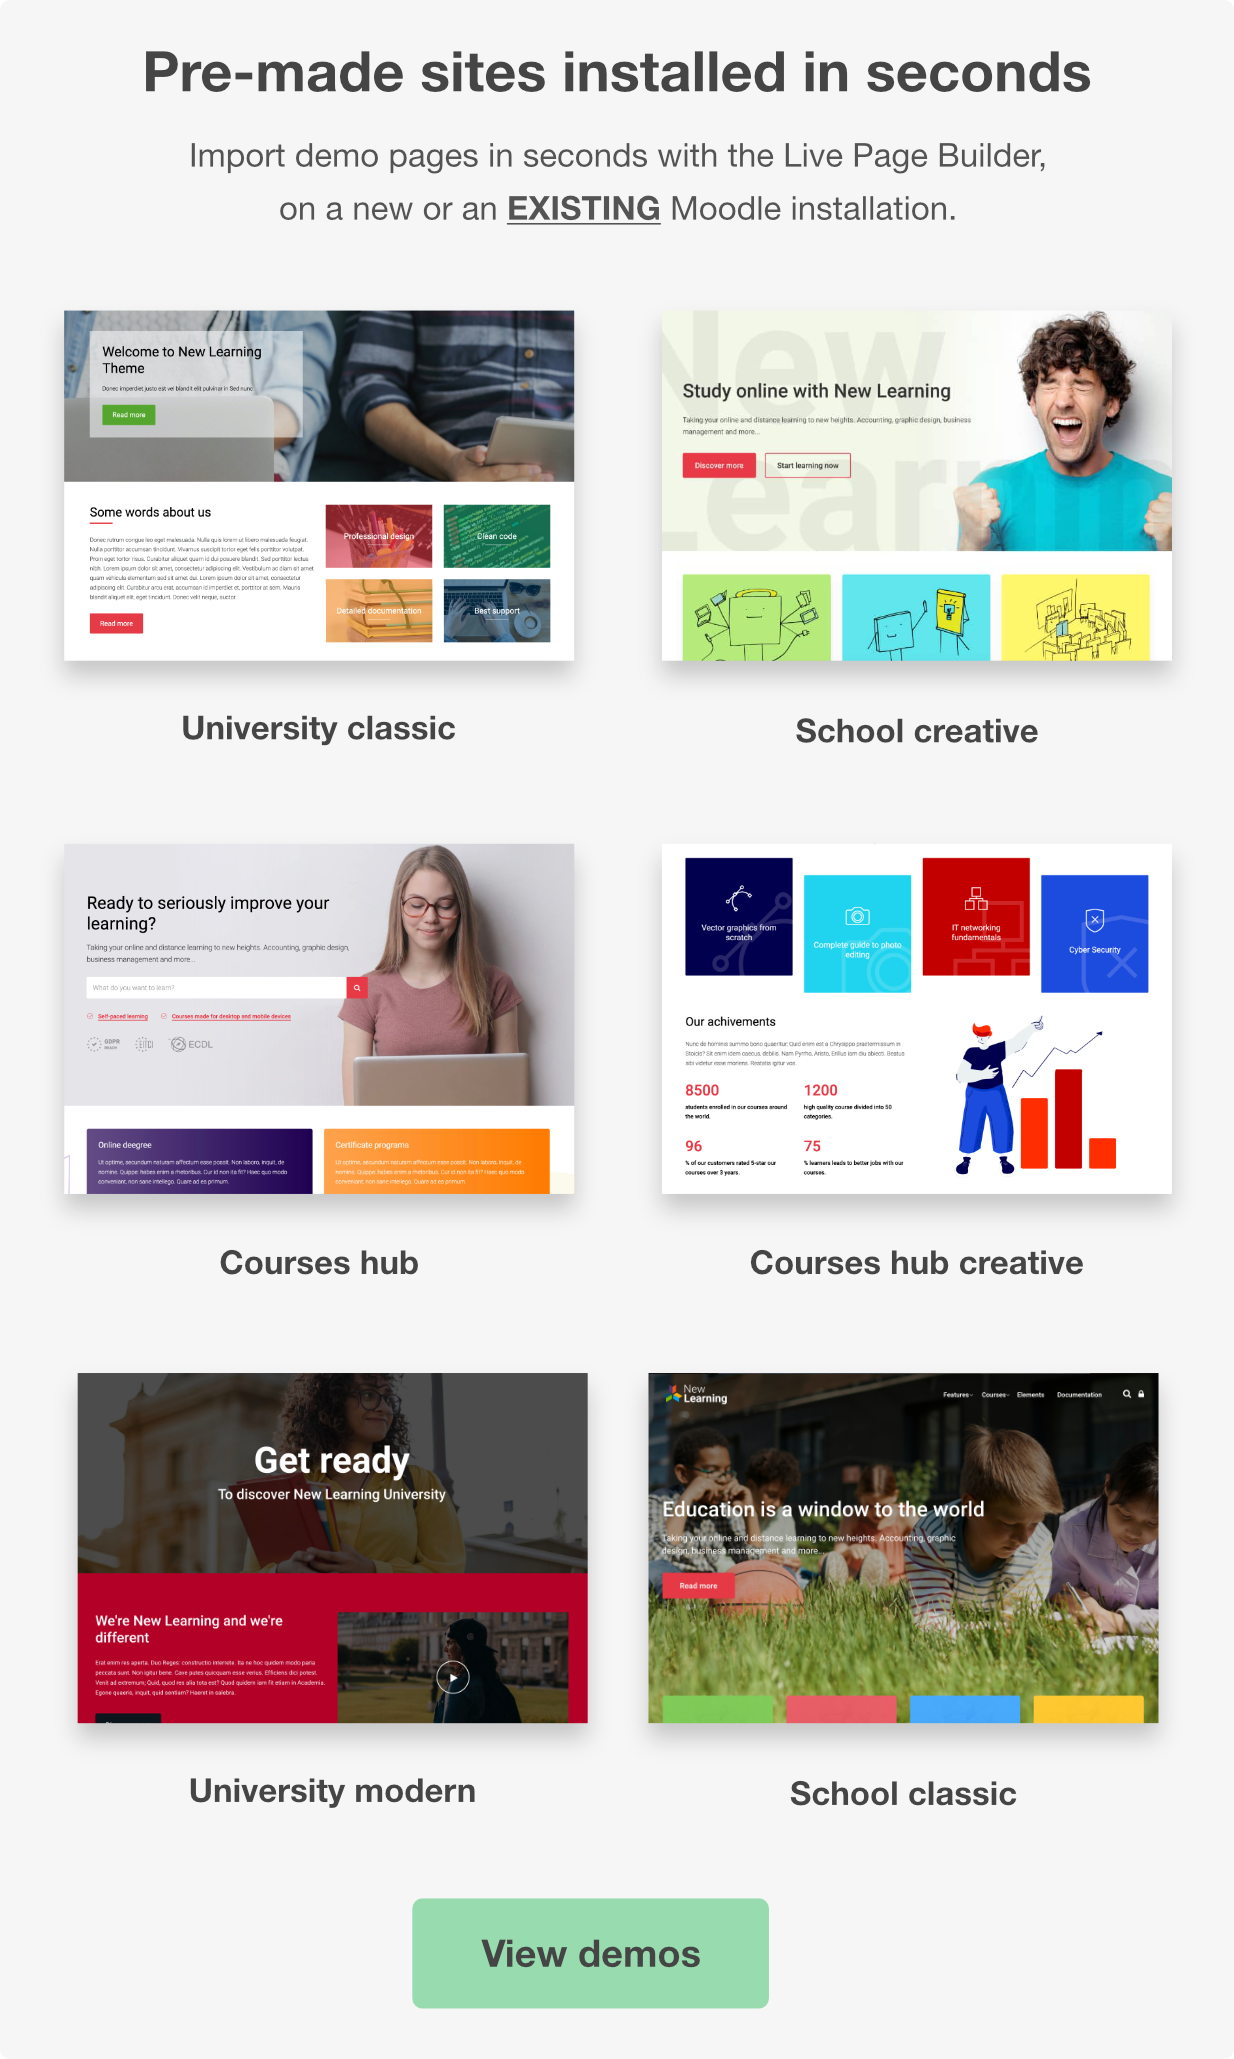 New Learning | Premium Moodle Theme